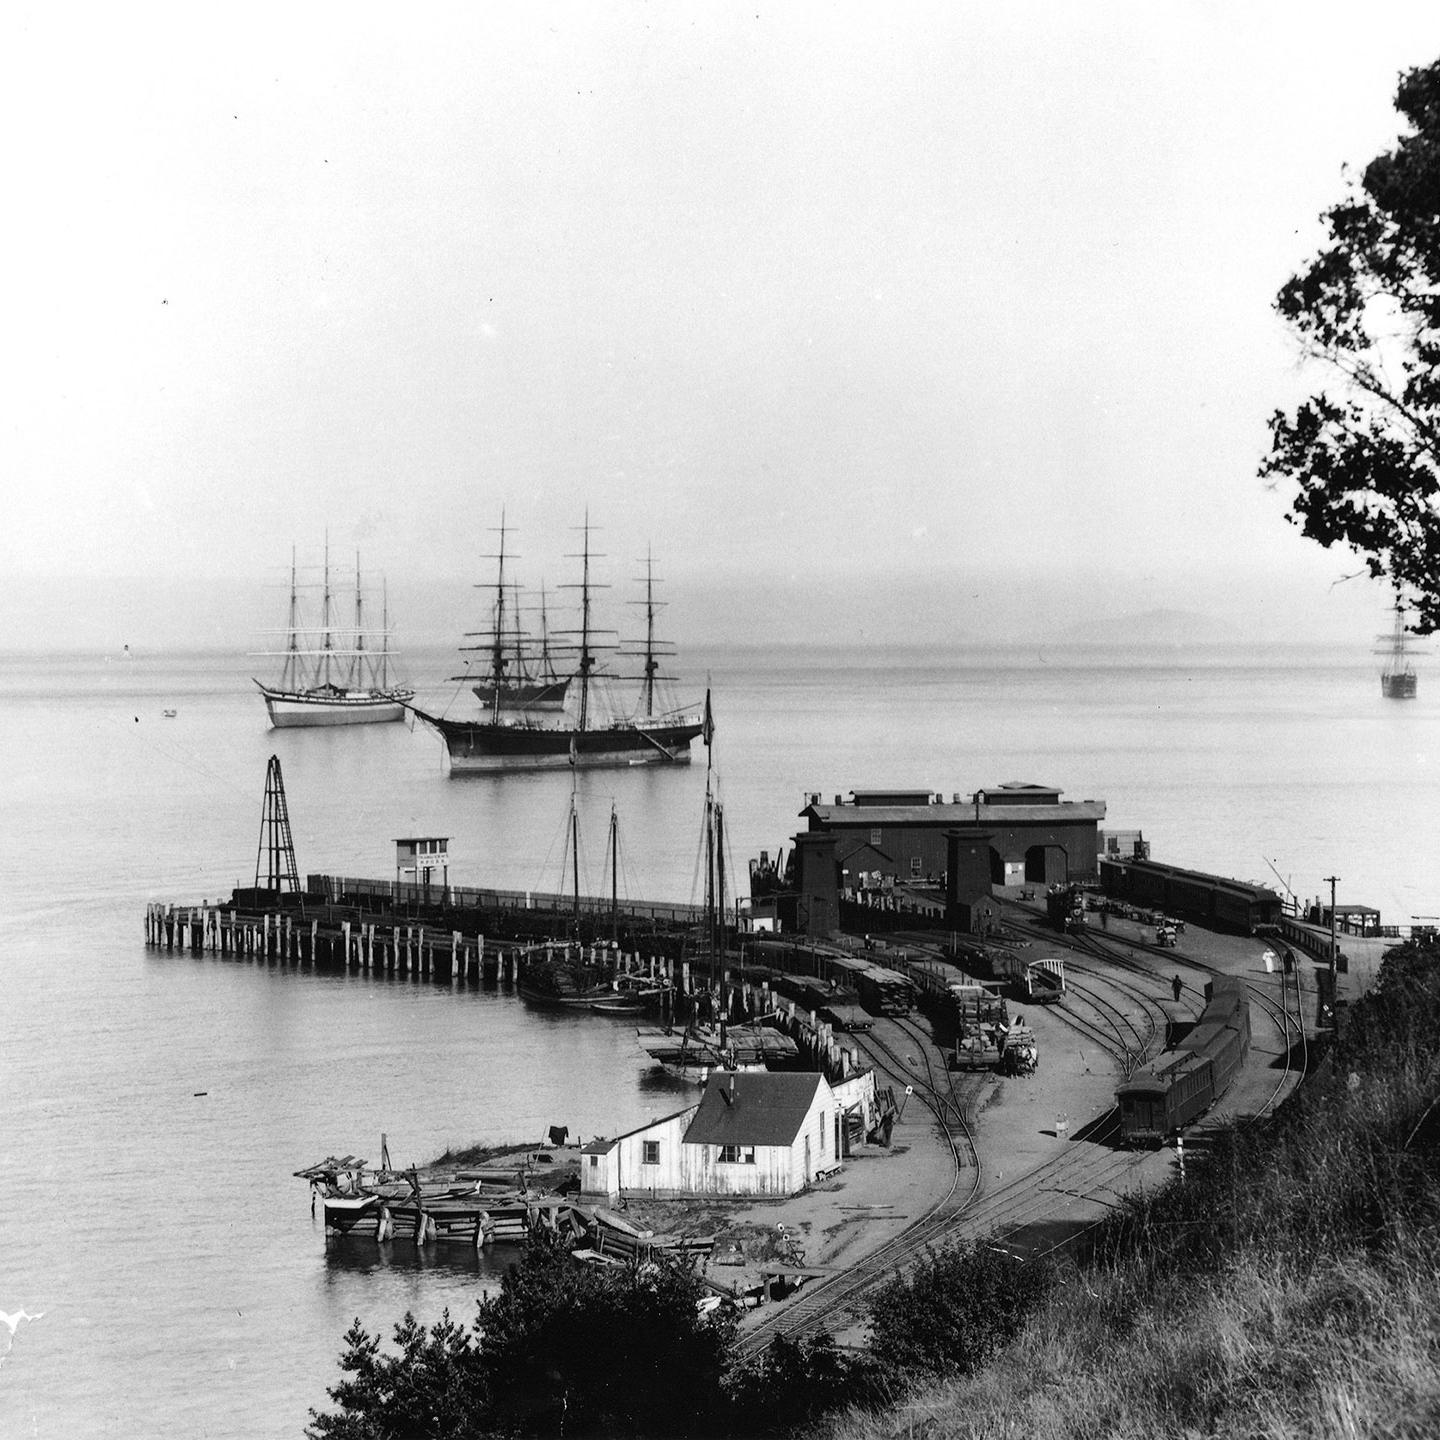 Sausalito in the 1890s